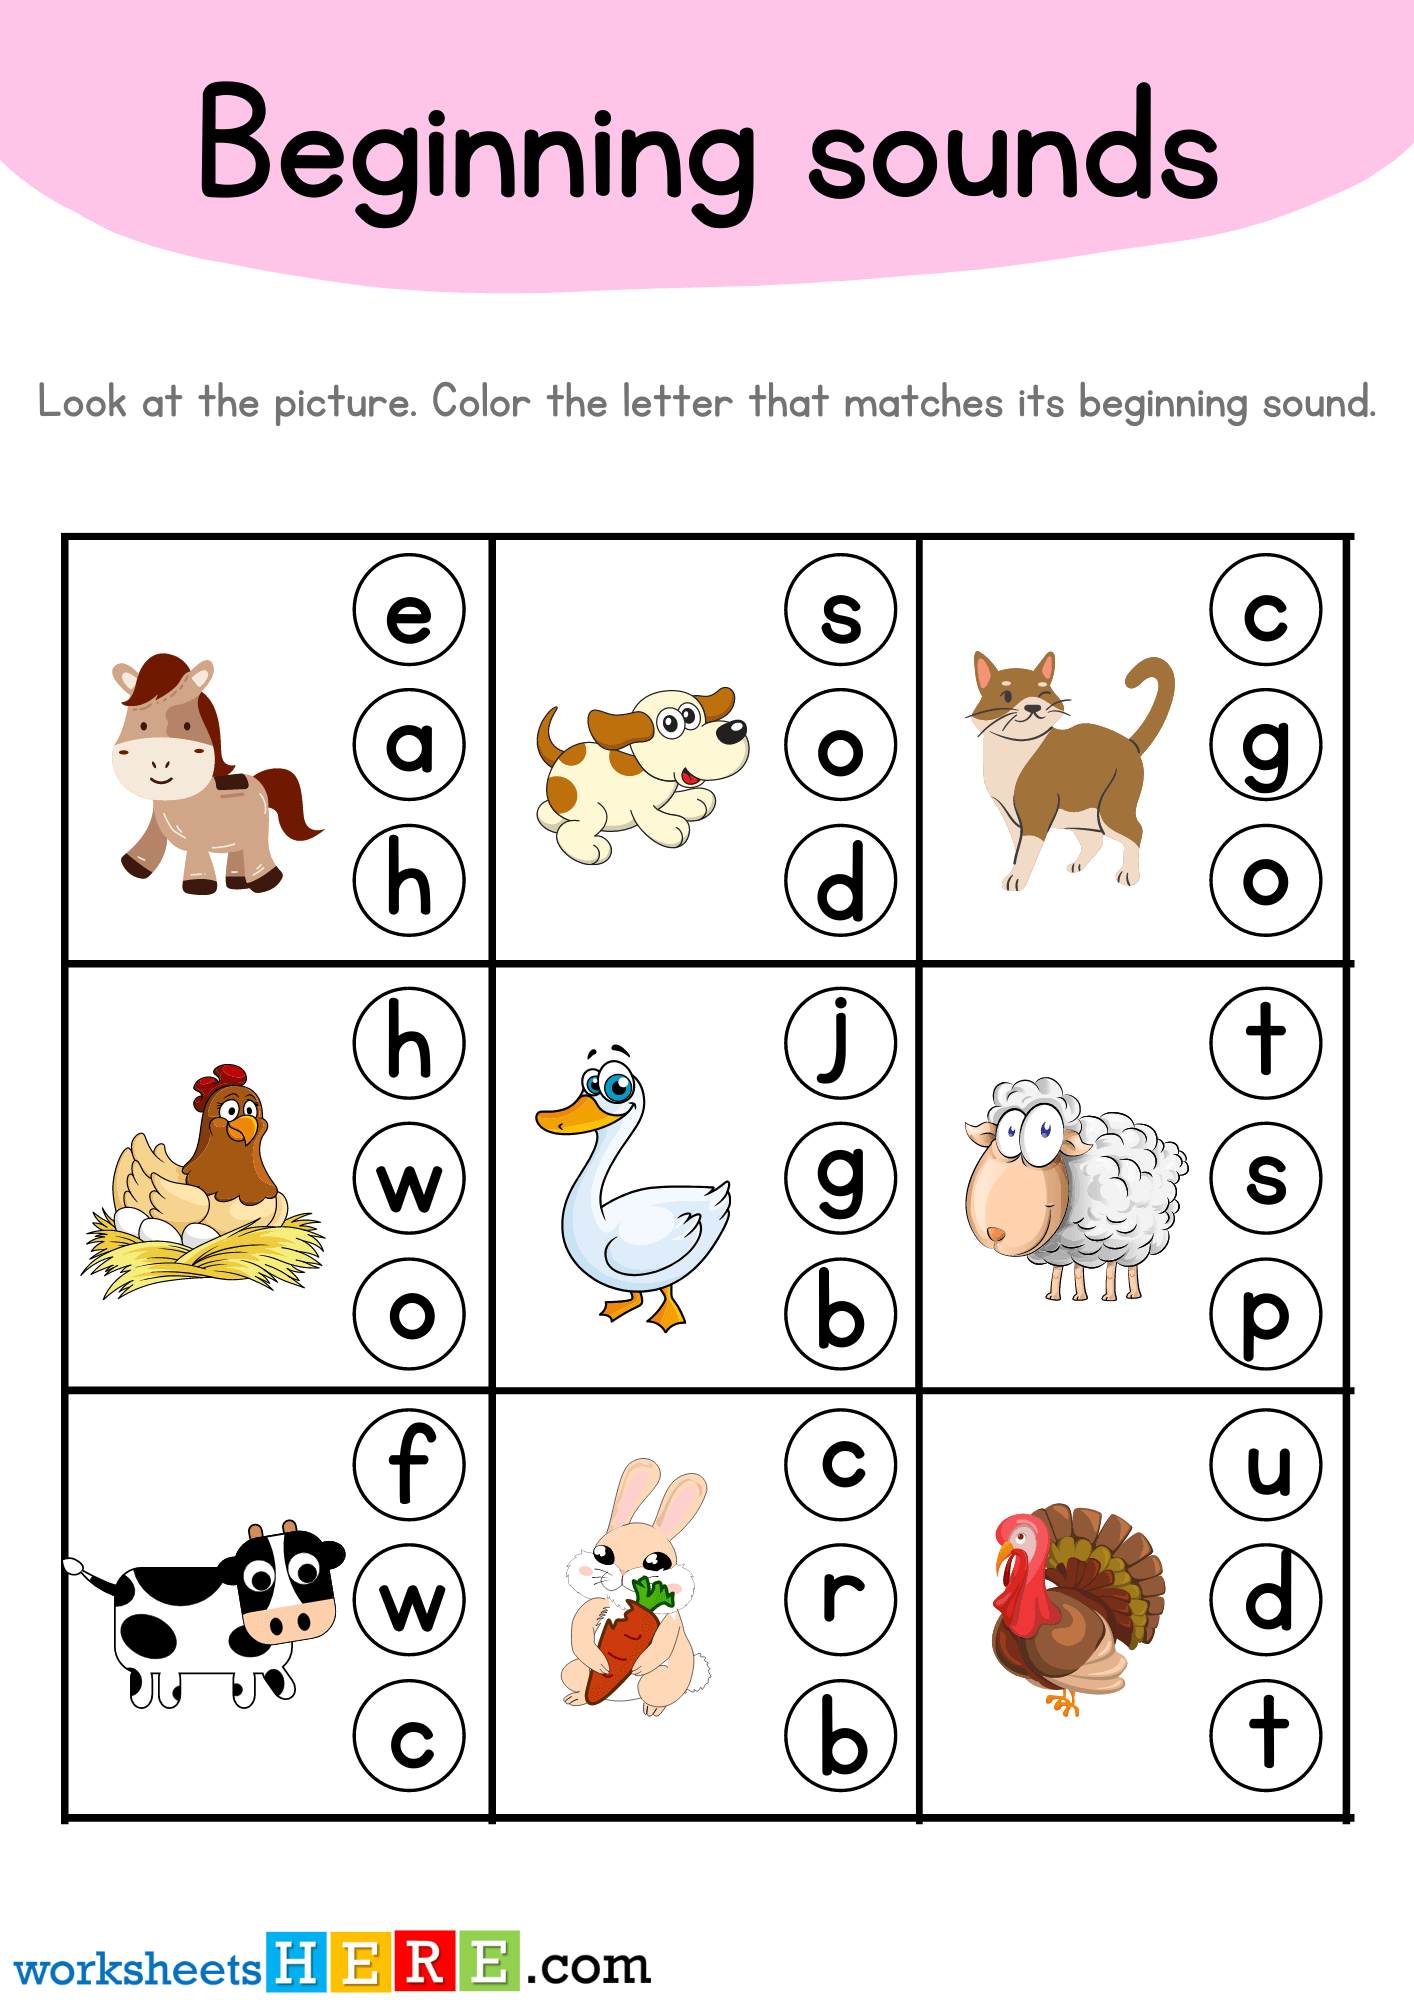 Beginning Sounds PDF Worksheet with Farm Animals, Starting Sound Activity for Kids